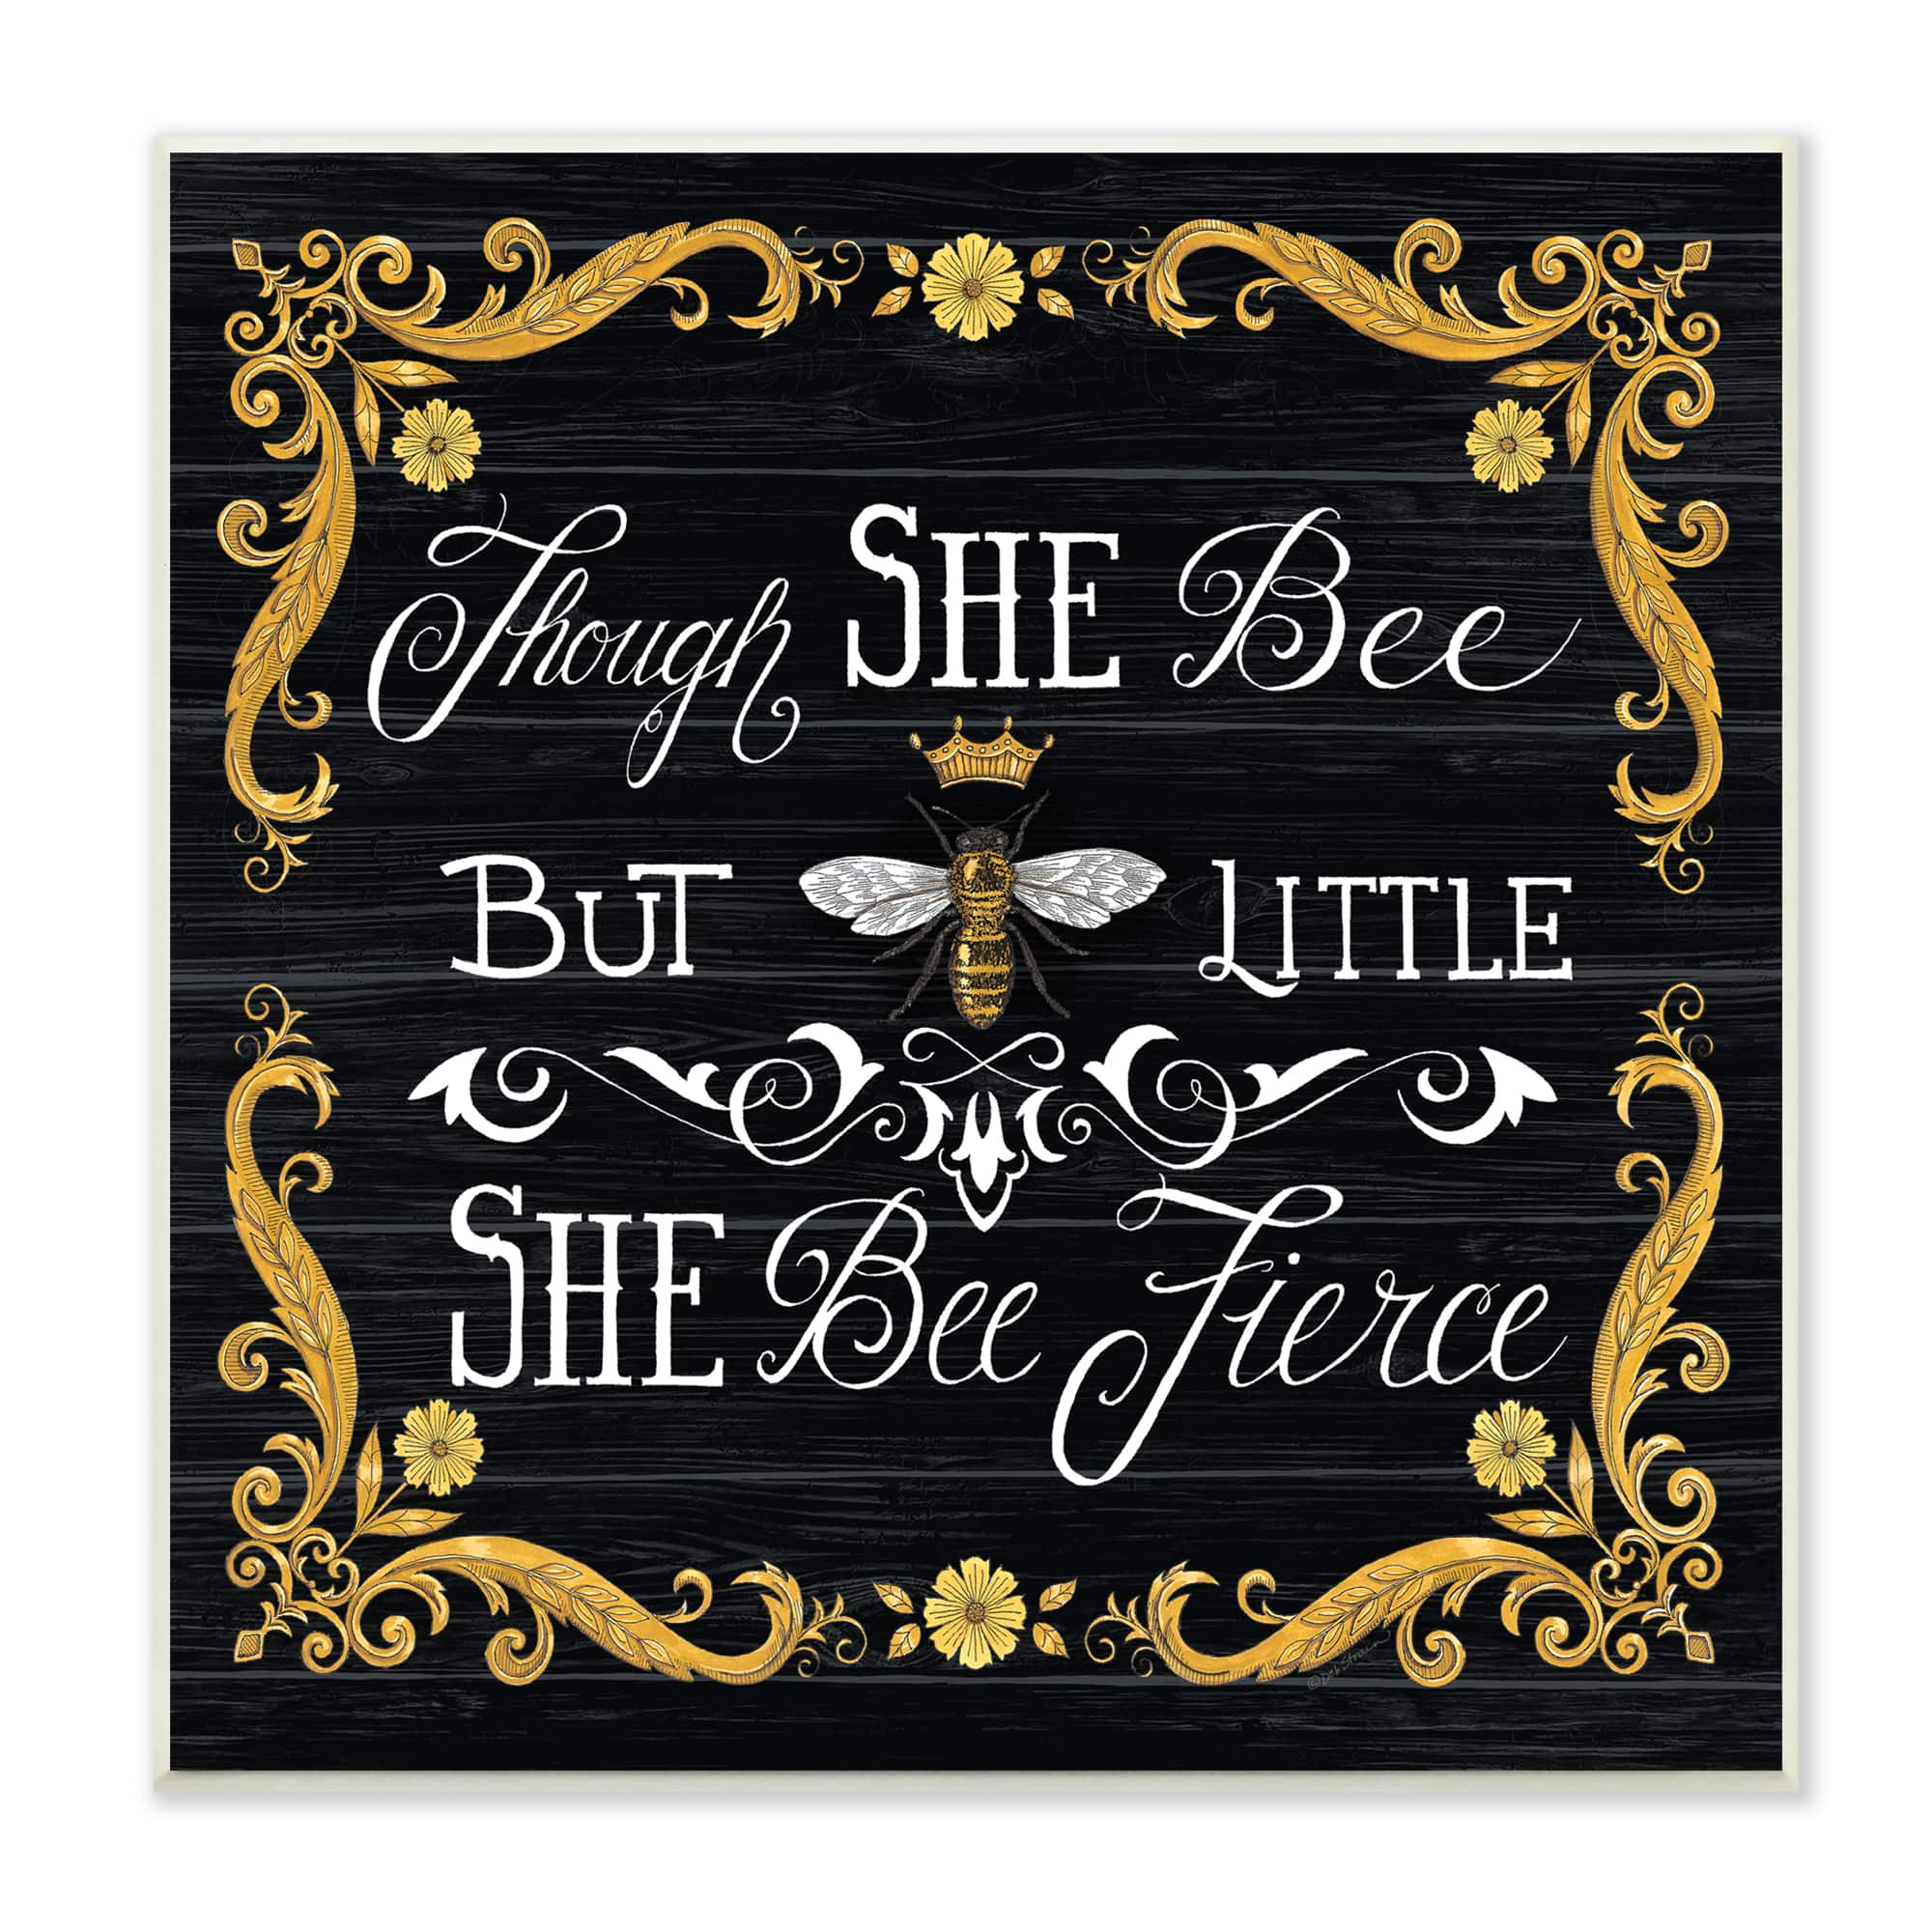 Stupell Industries She Bee Fierce Female Motivational Phrase Vintage Pun Wood Wall Plaque